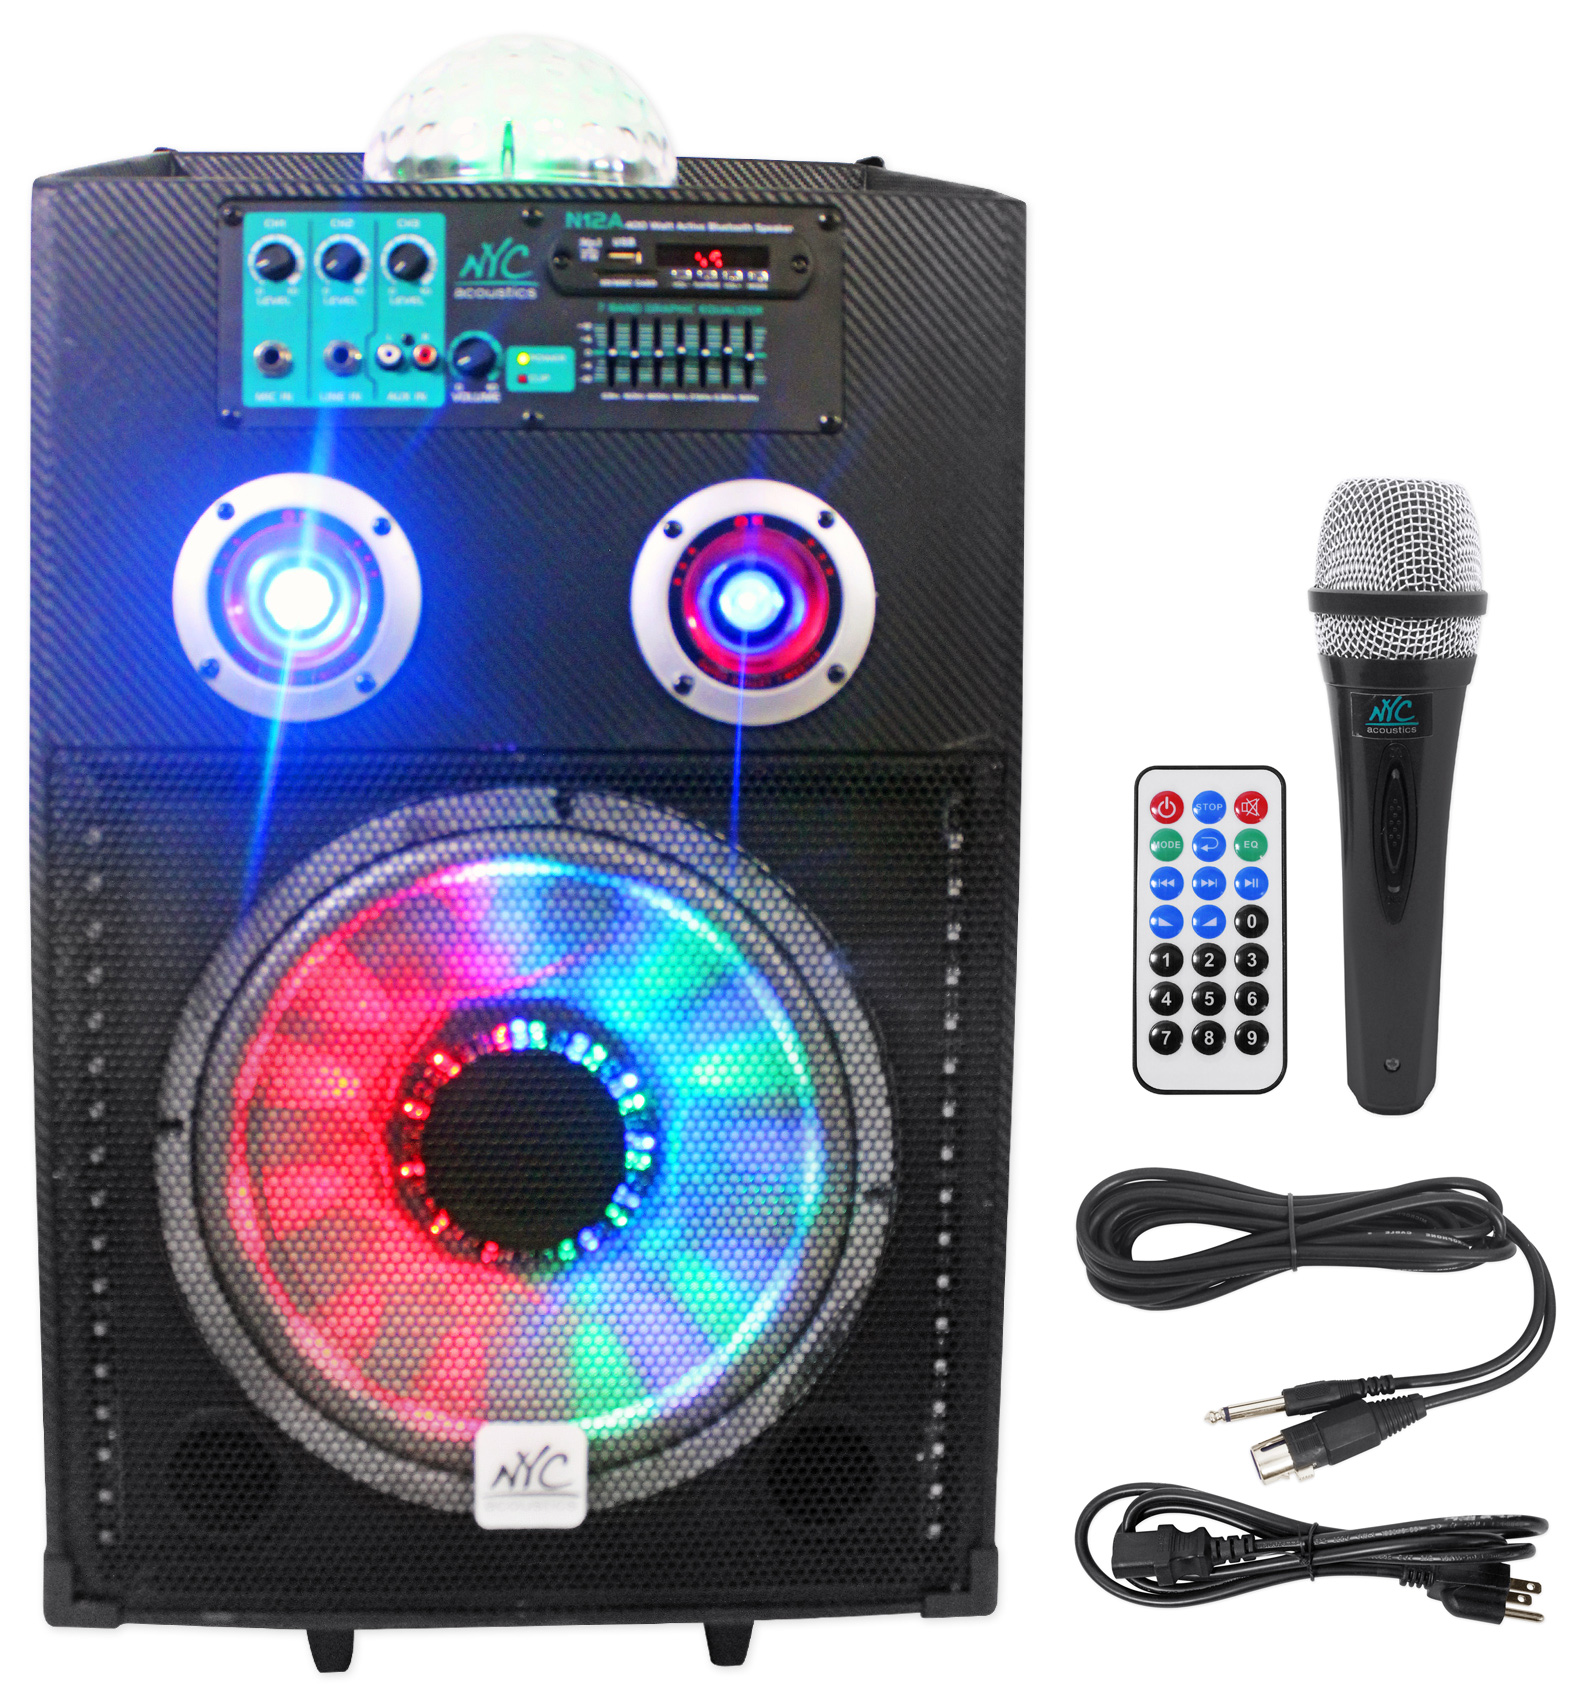 NYC Acoustics N12A 12" 400w Powered Speaker Bluetooth, Party Lights+Microphone - image 1 of 9